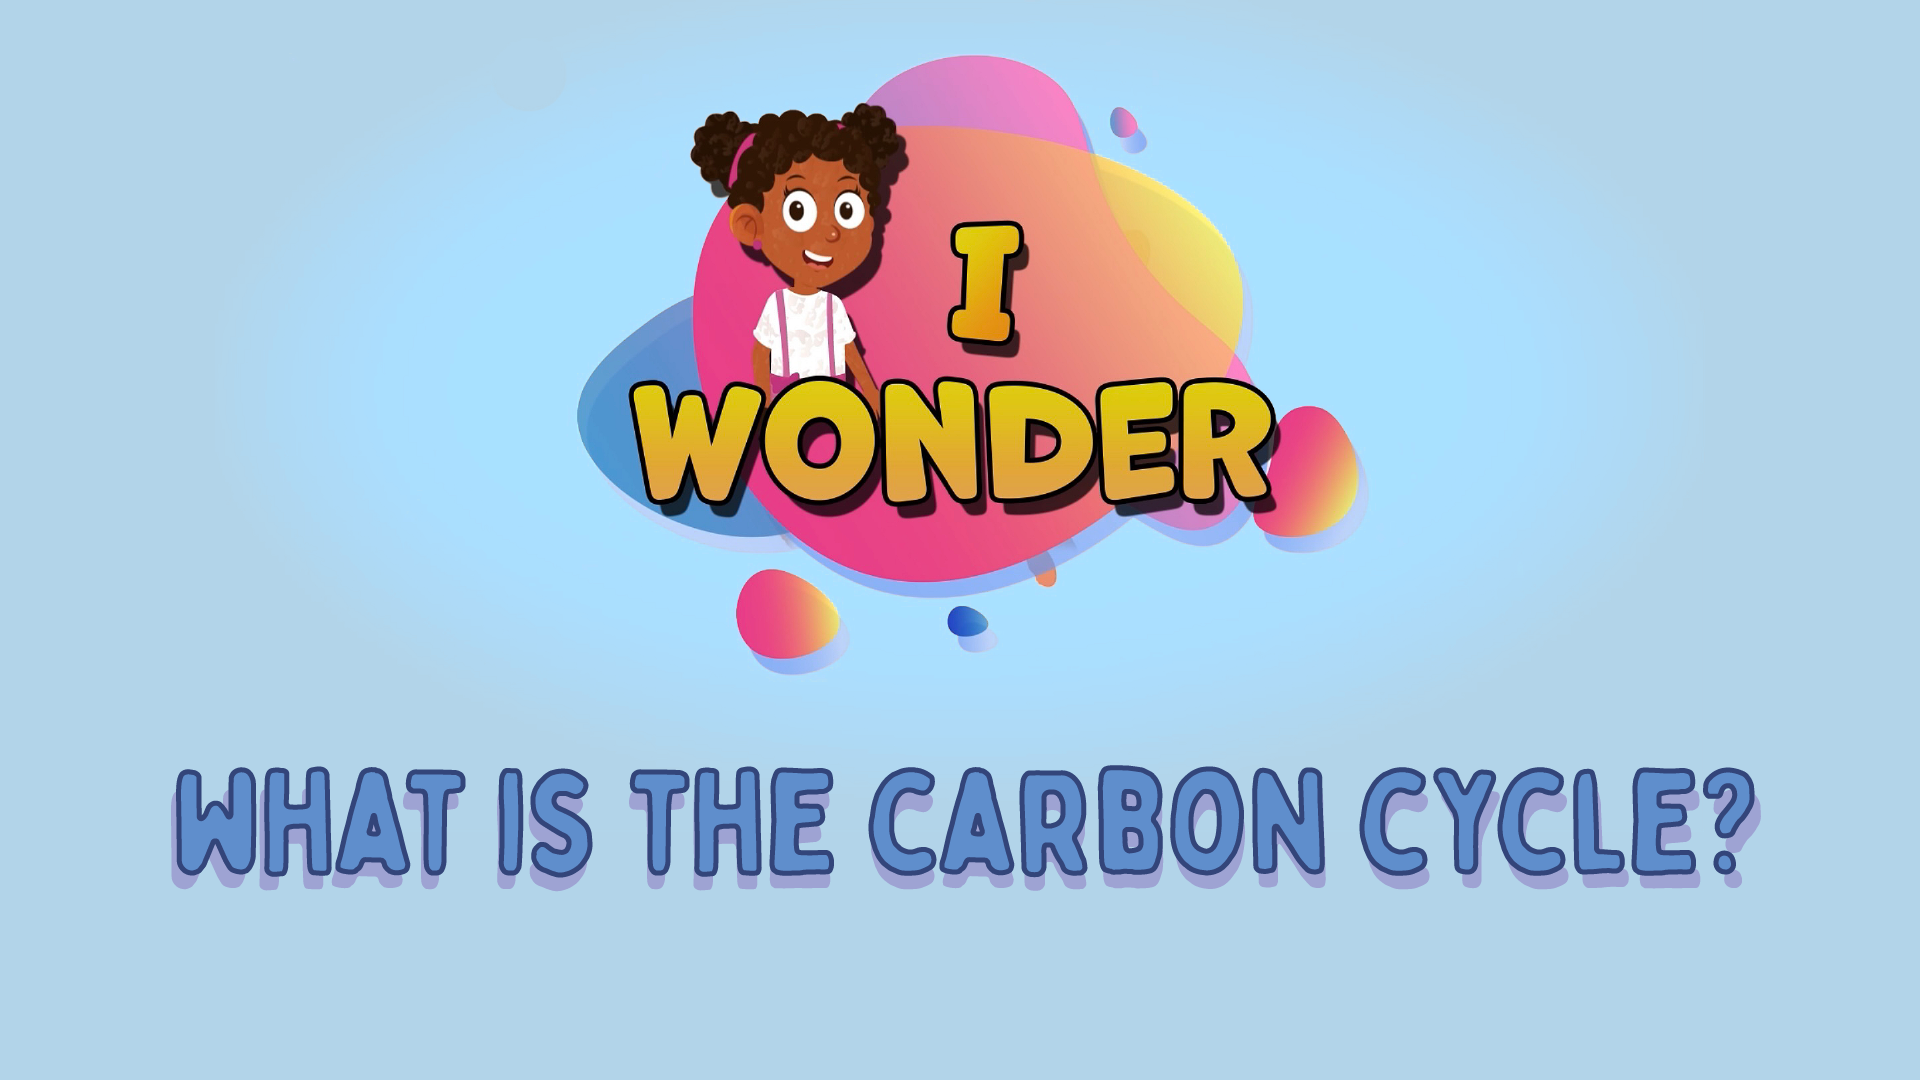 What is the Carbon Cycle?